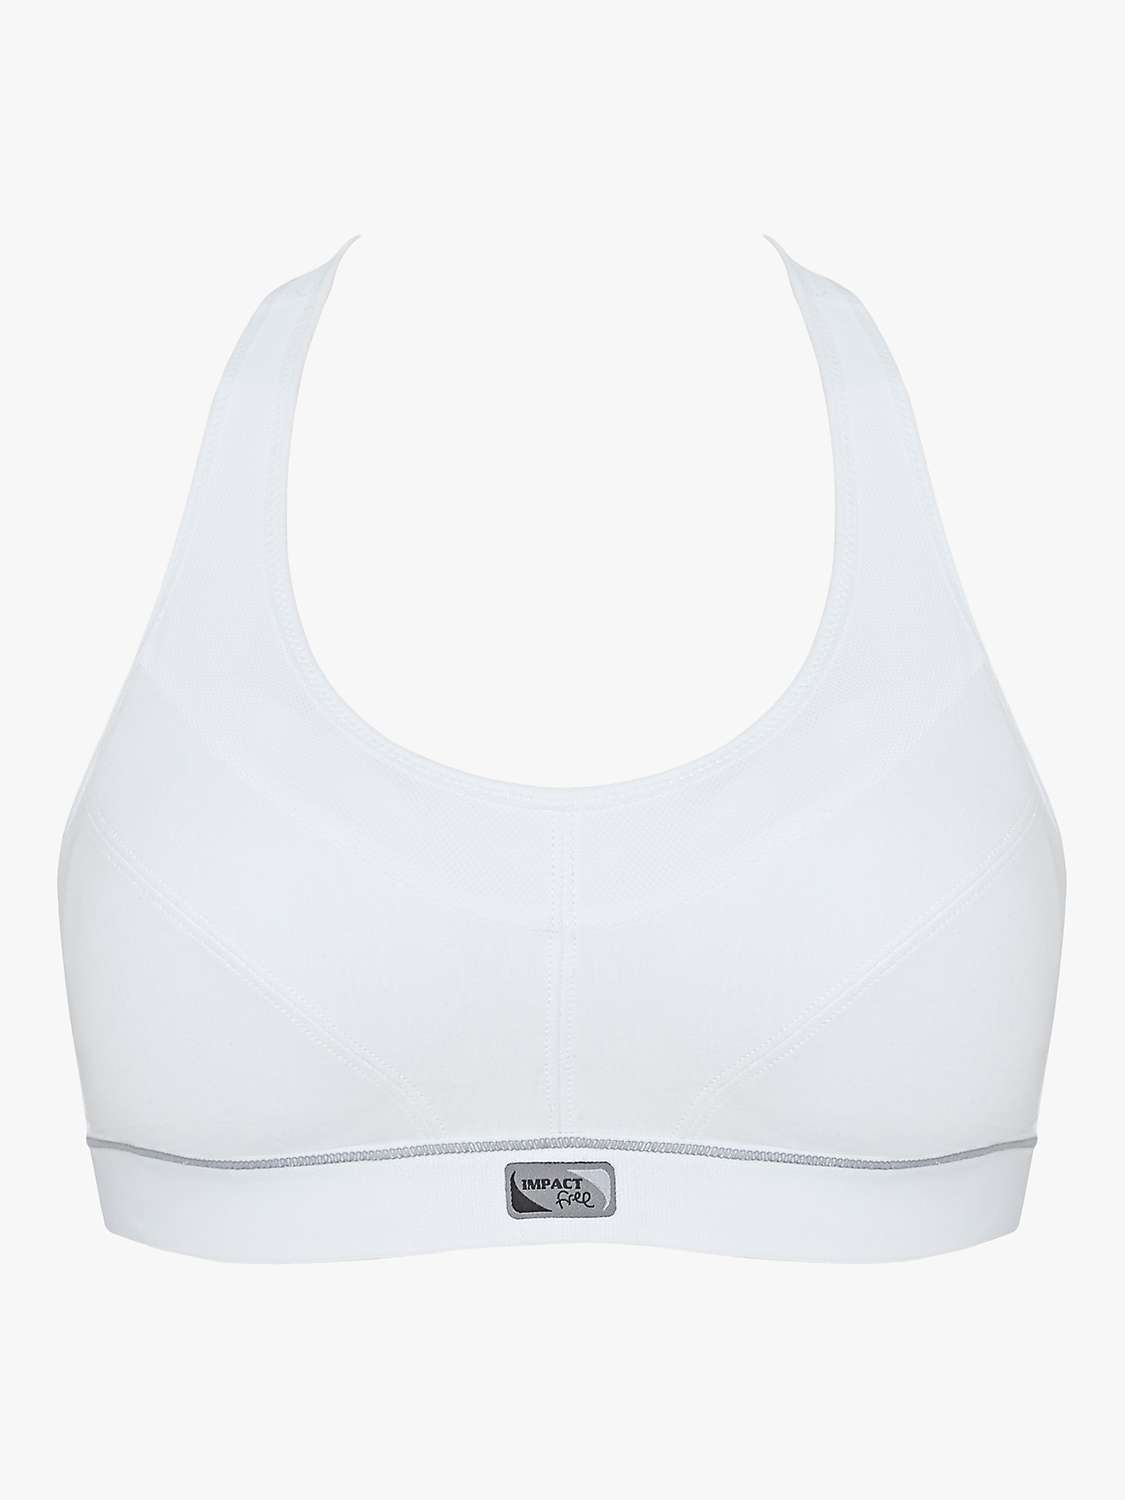 Buy Royce Impact Free Petite Non-Wired Sports Bra, White Online at johnlewis.com